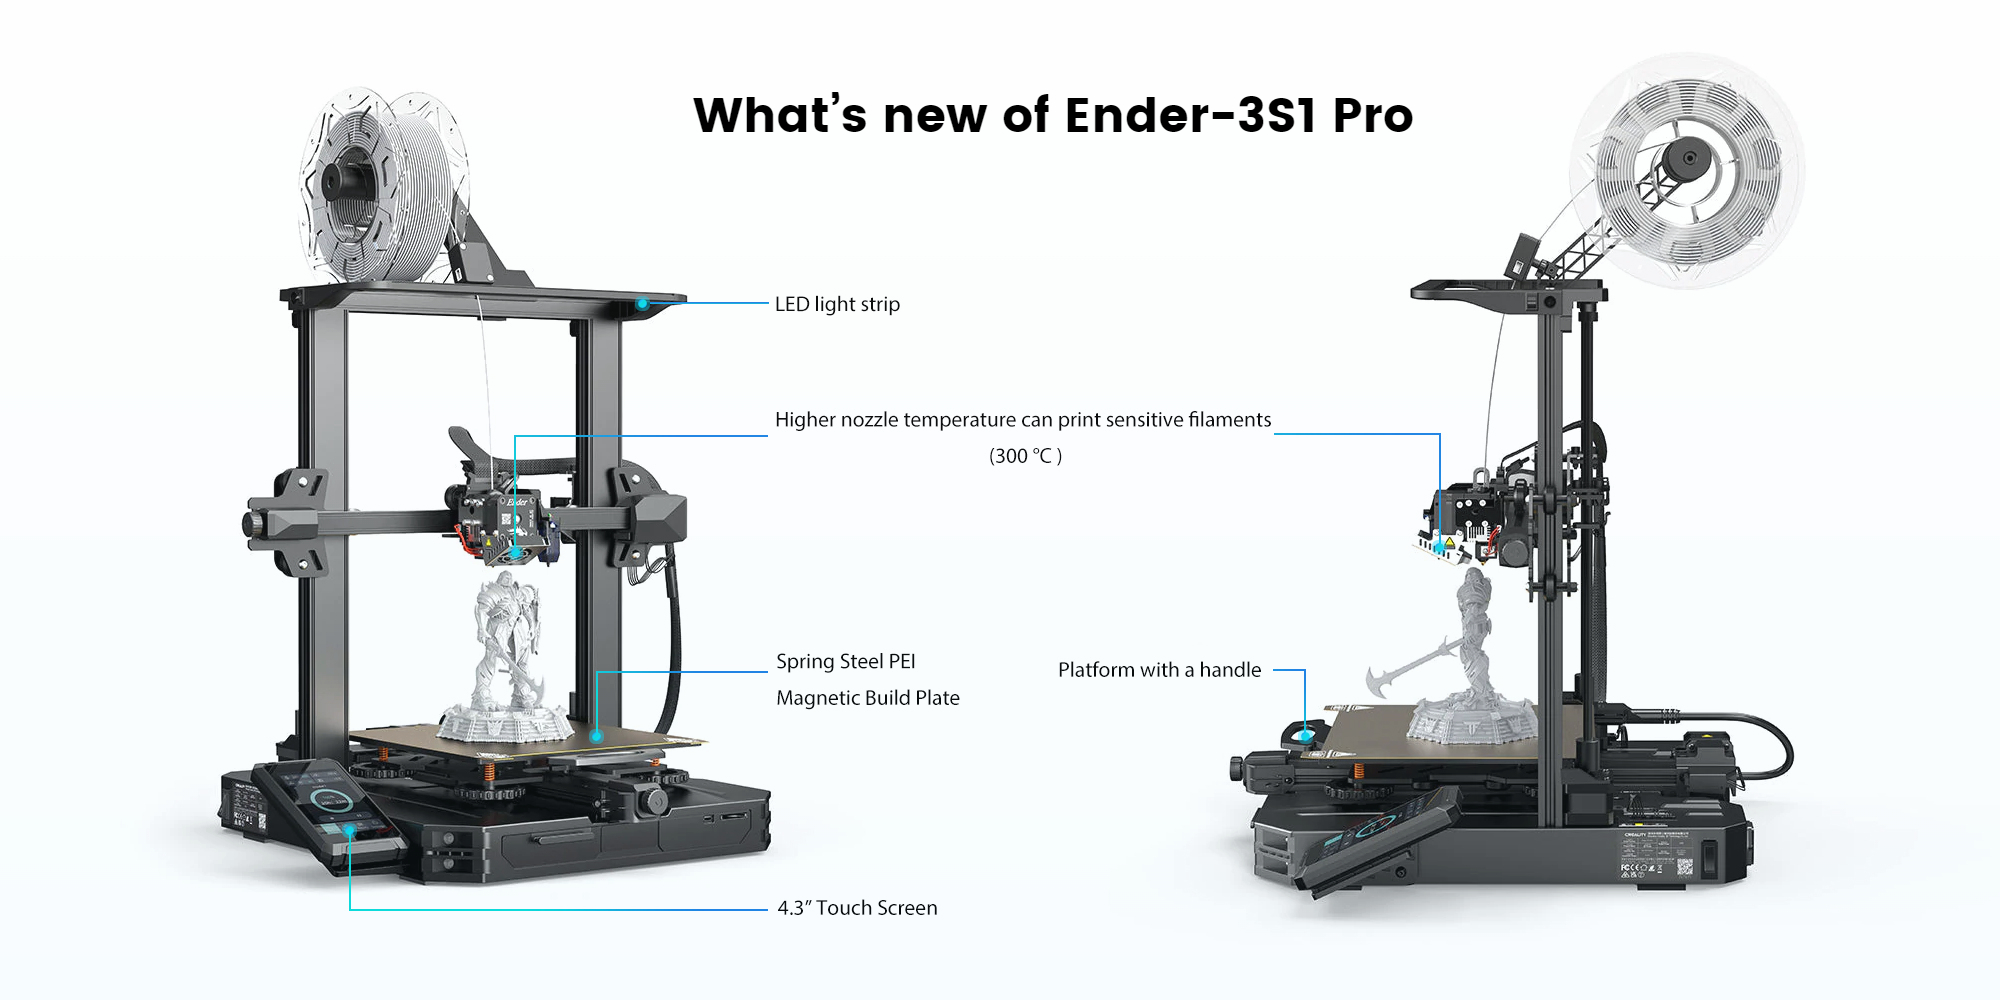 Creality Ender-3S1 Pro Sprite Direct Drive | CR Touch Auto Level 